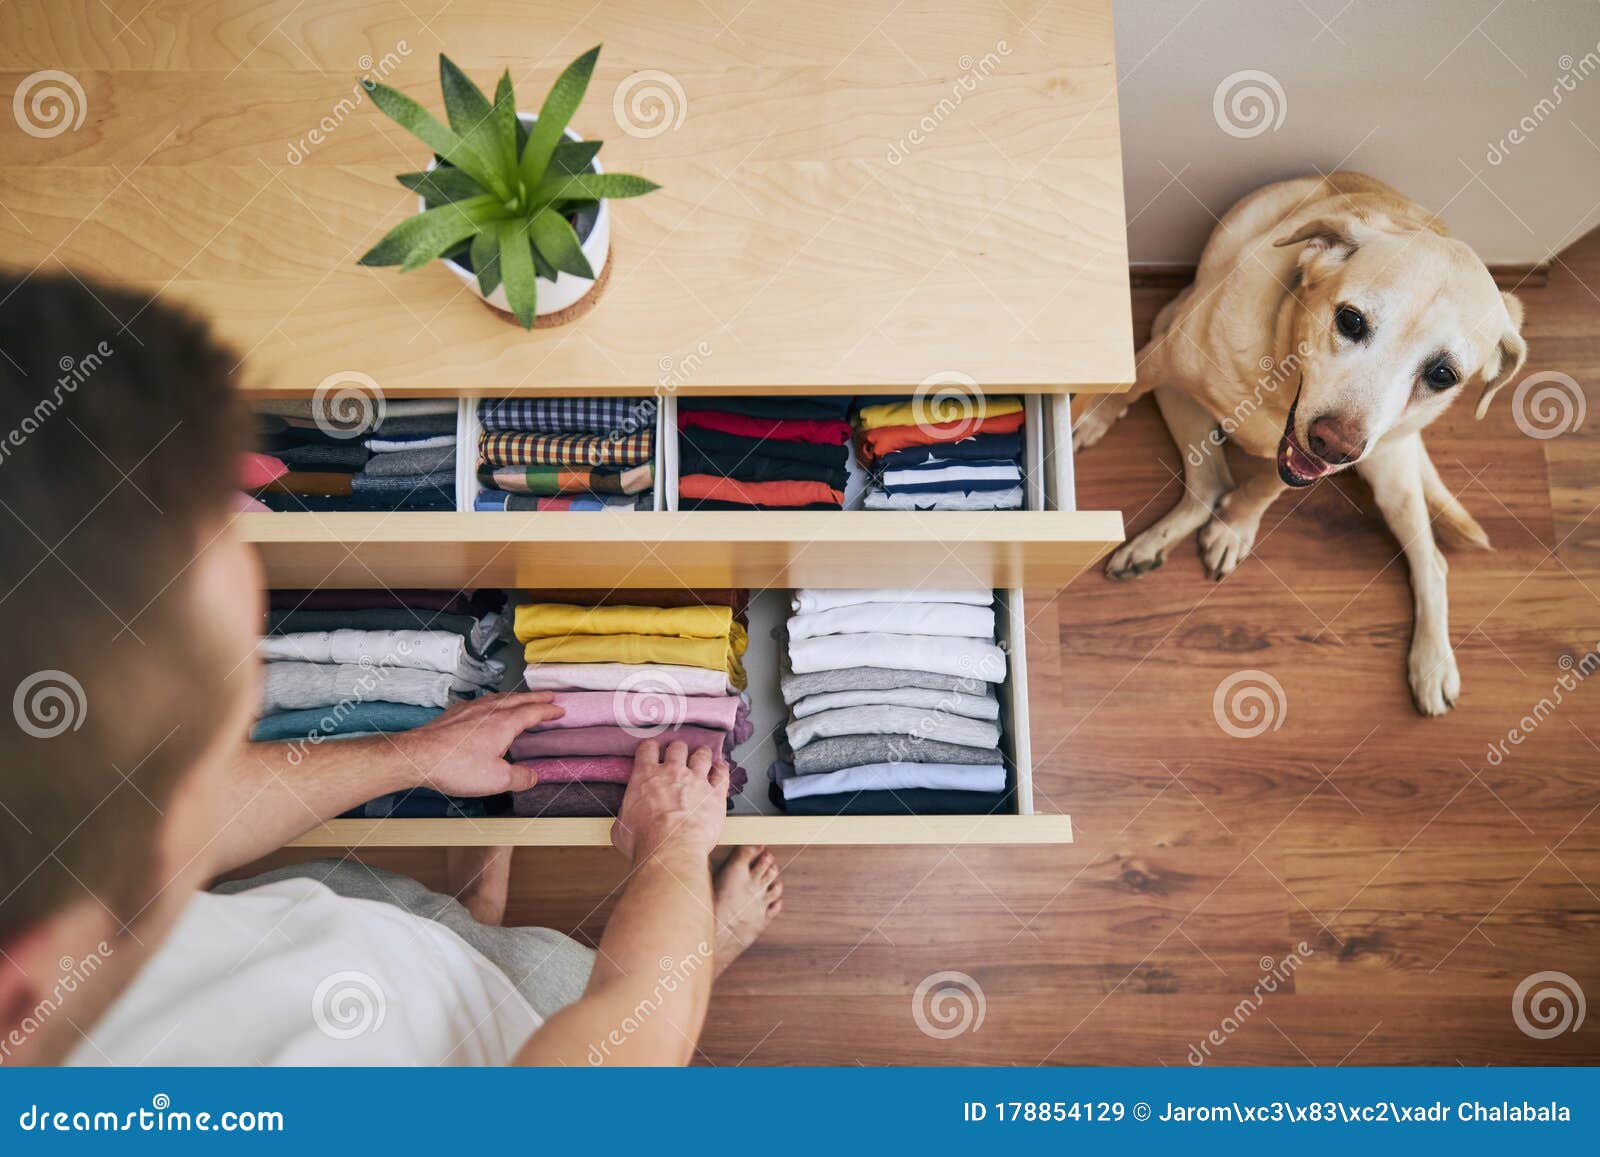 organizing and cleaning home